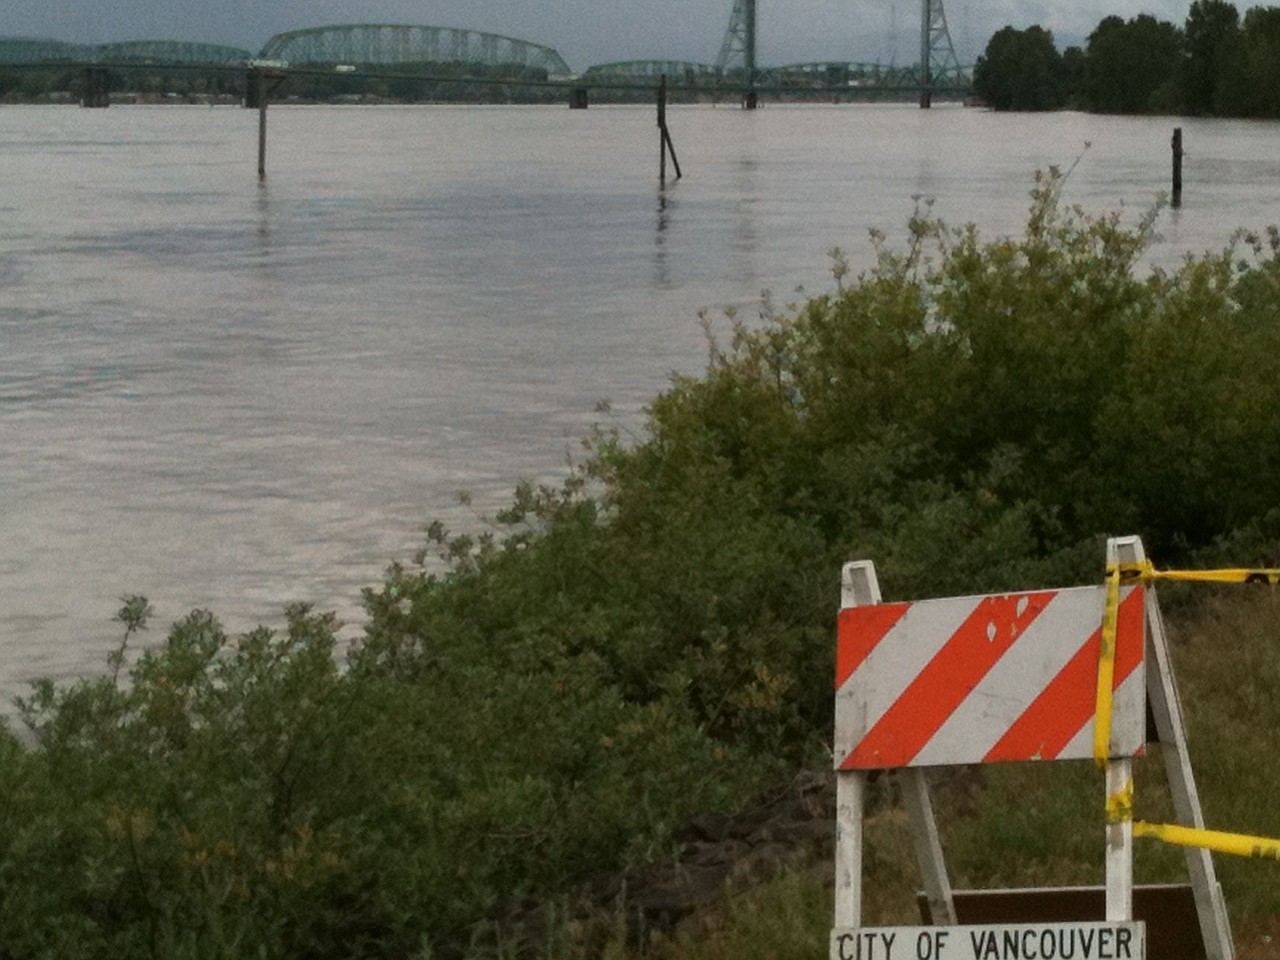 The City of Vancouver has cordoned off a section of the Waterfront Renaissance Trail between the Interstate 5 Bridge and Beaches Restaurant &amp; Bar because of high water that last week spilled over the Columbia River bank.